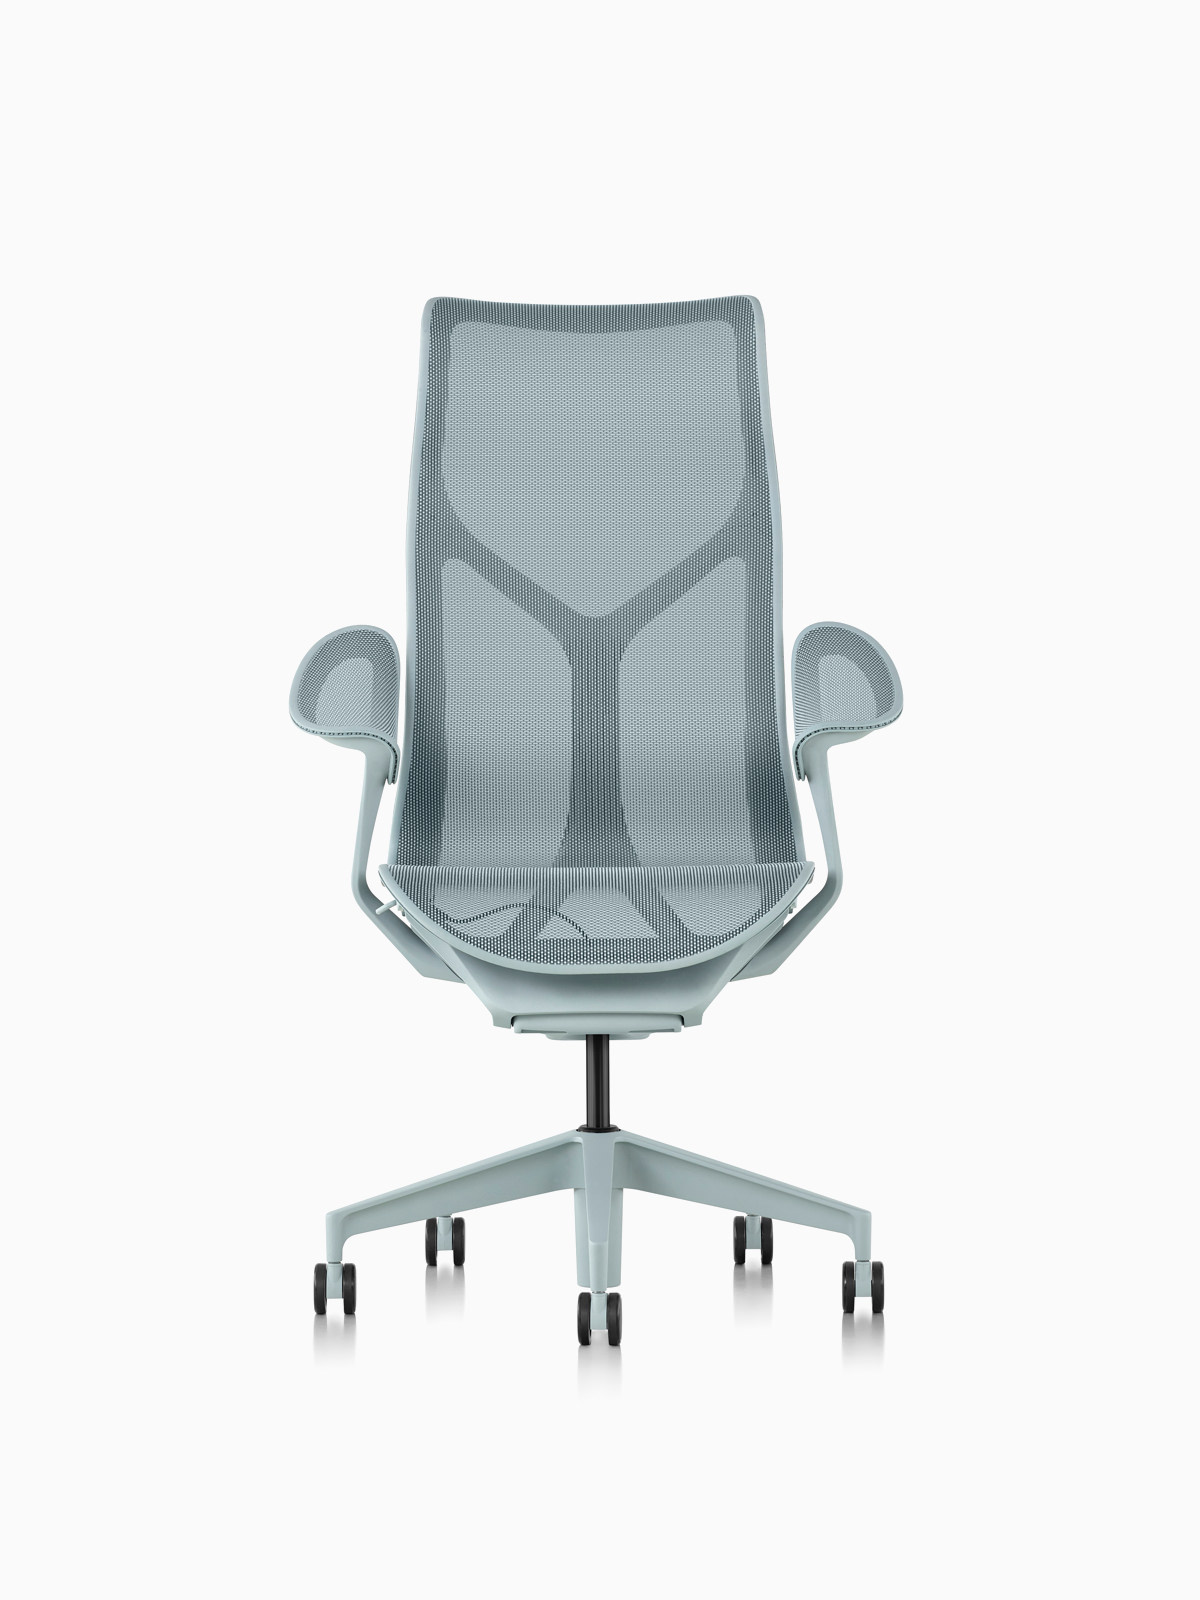 A high-back Cosm Chair with leaf arms in Glacier light blue.